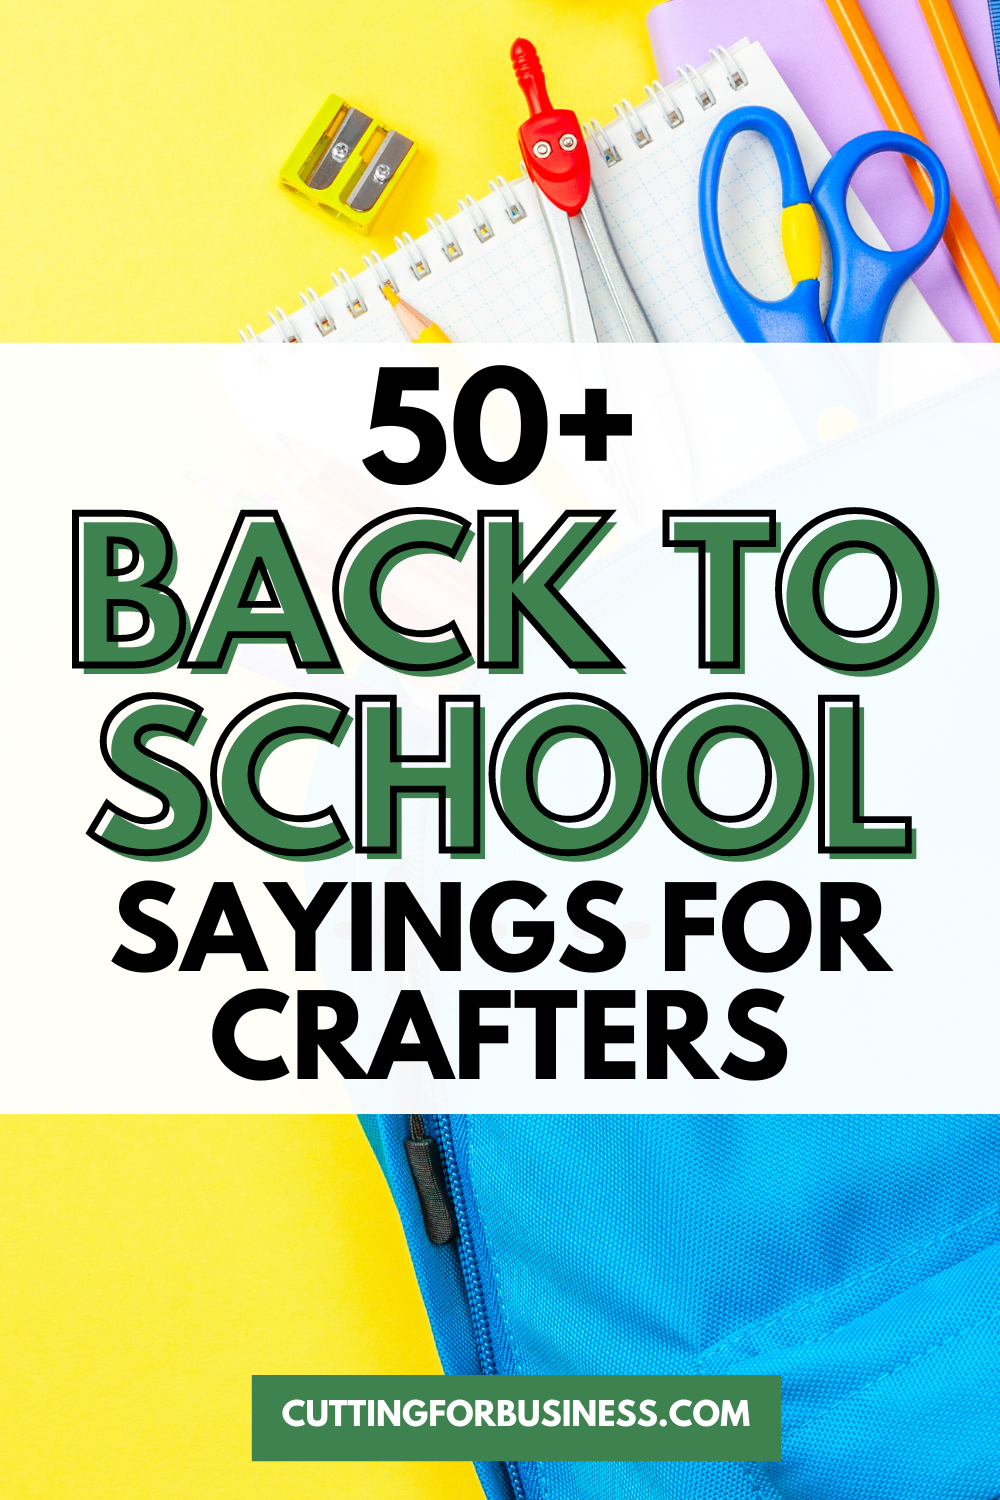 50+ Back to School Sayings for Crafters - cuttingforbusiness.com.